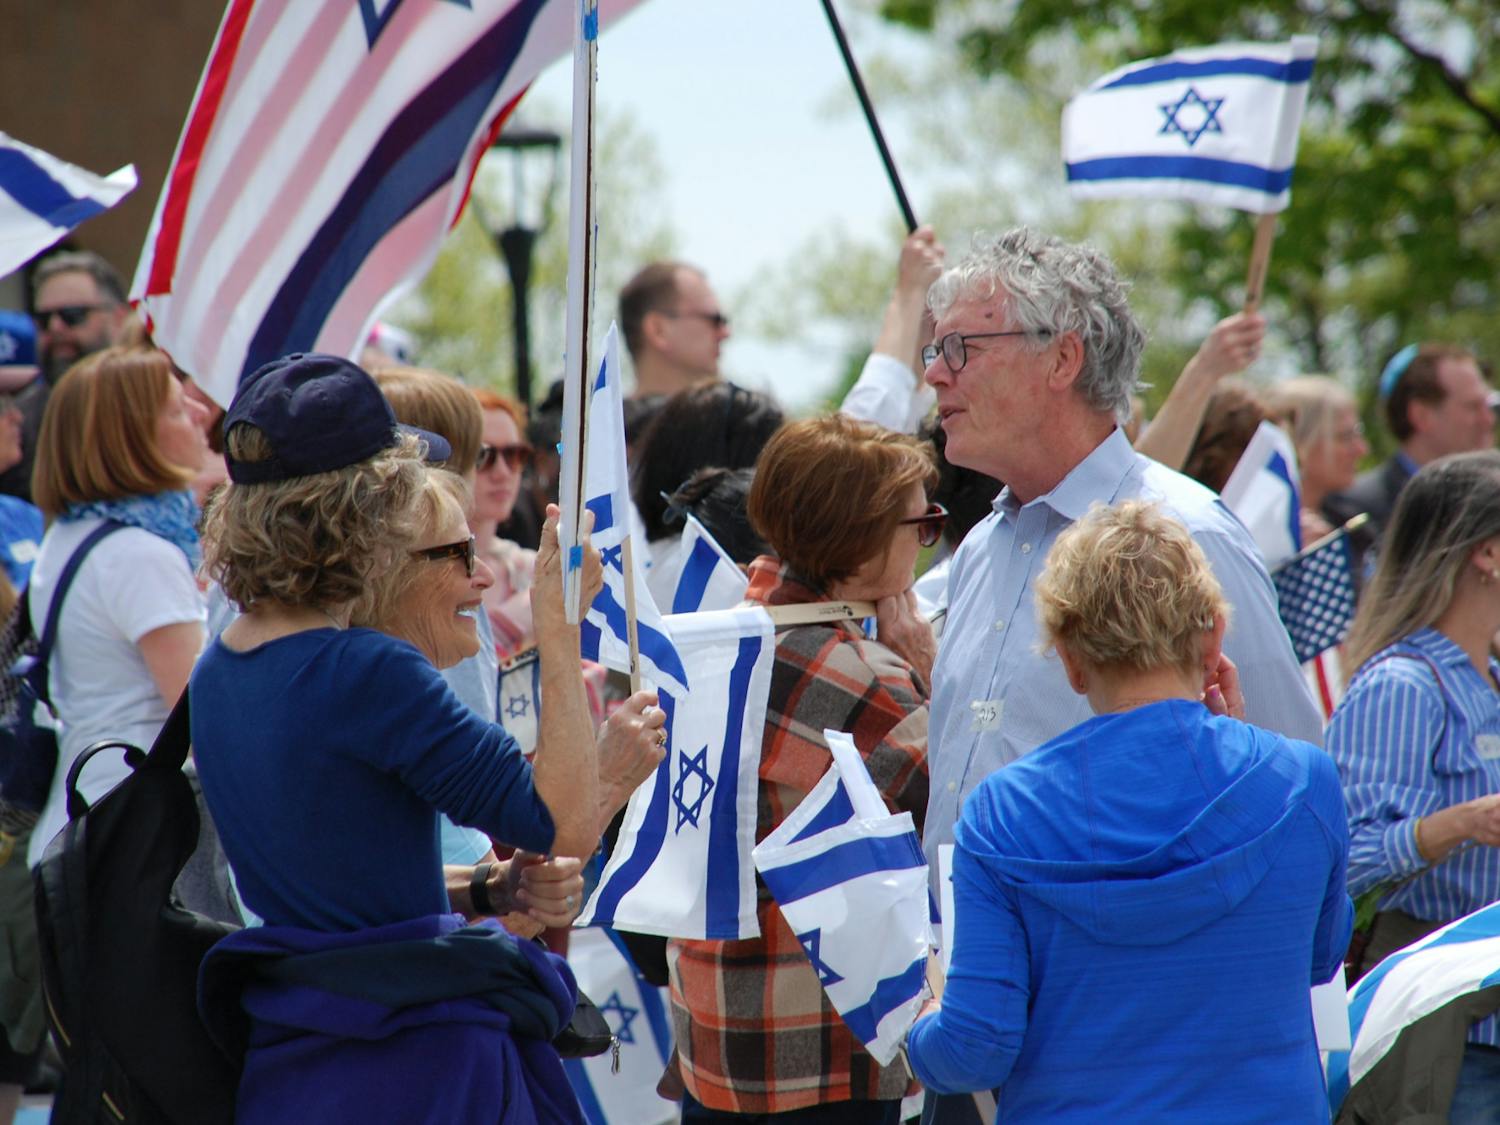 About 75 demonstrators attended Monday's pro-Israel rally organized by the Jewish Student Union (JSU).&nbsp;